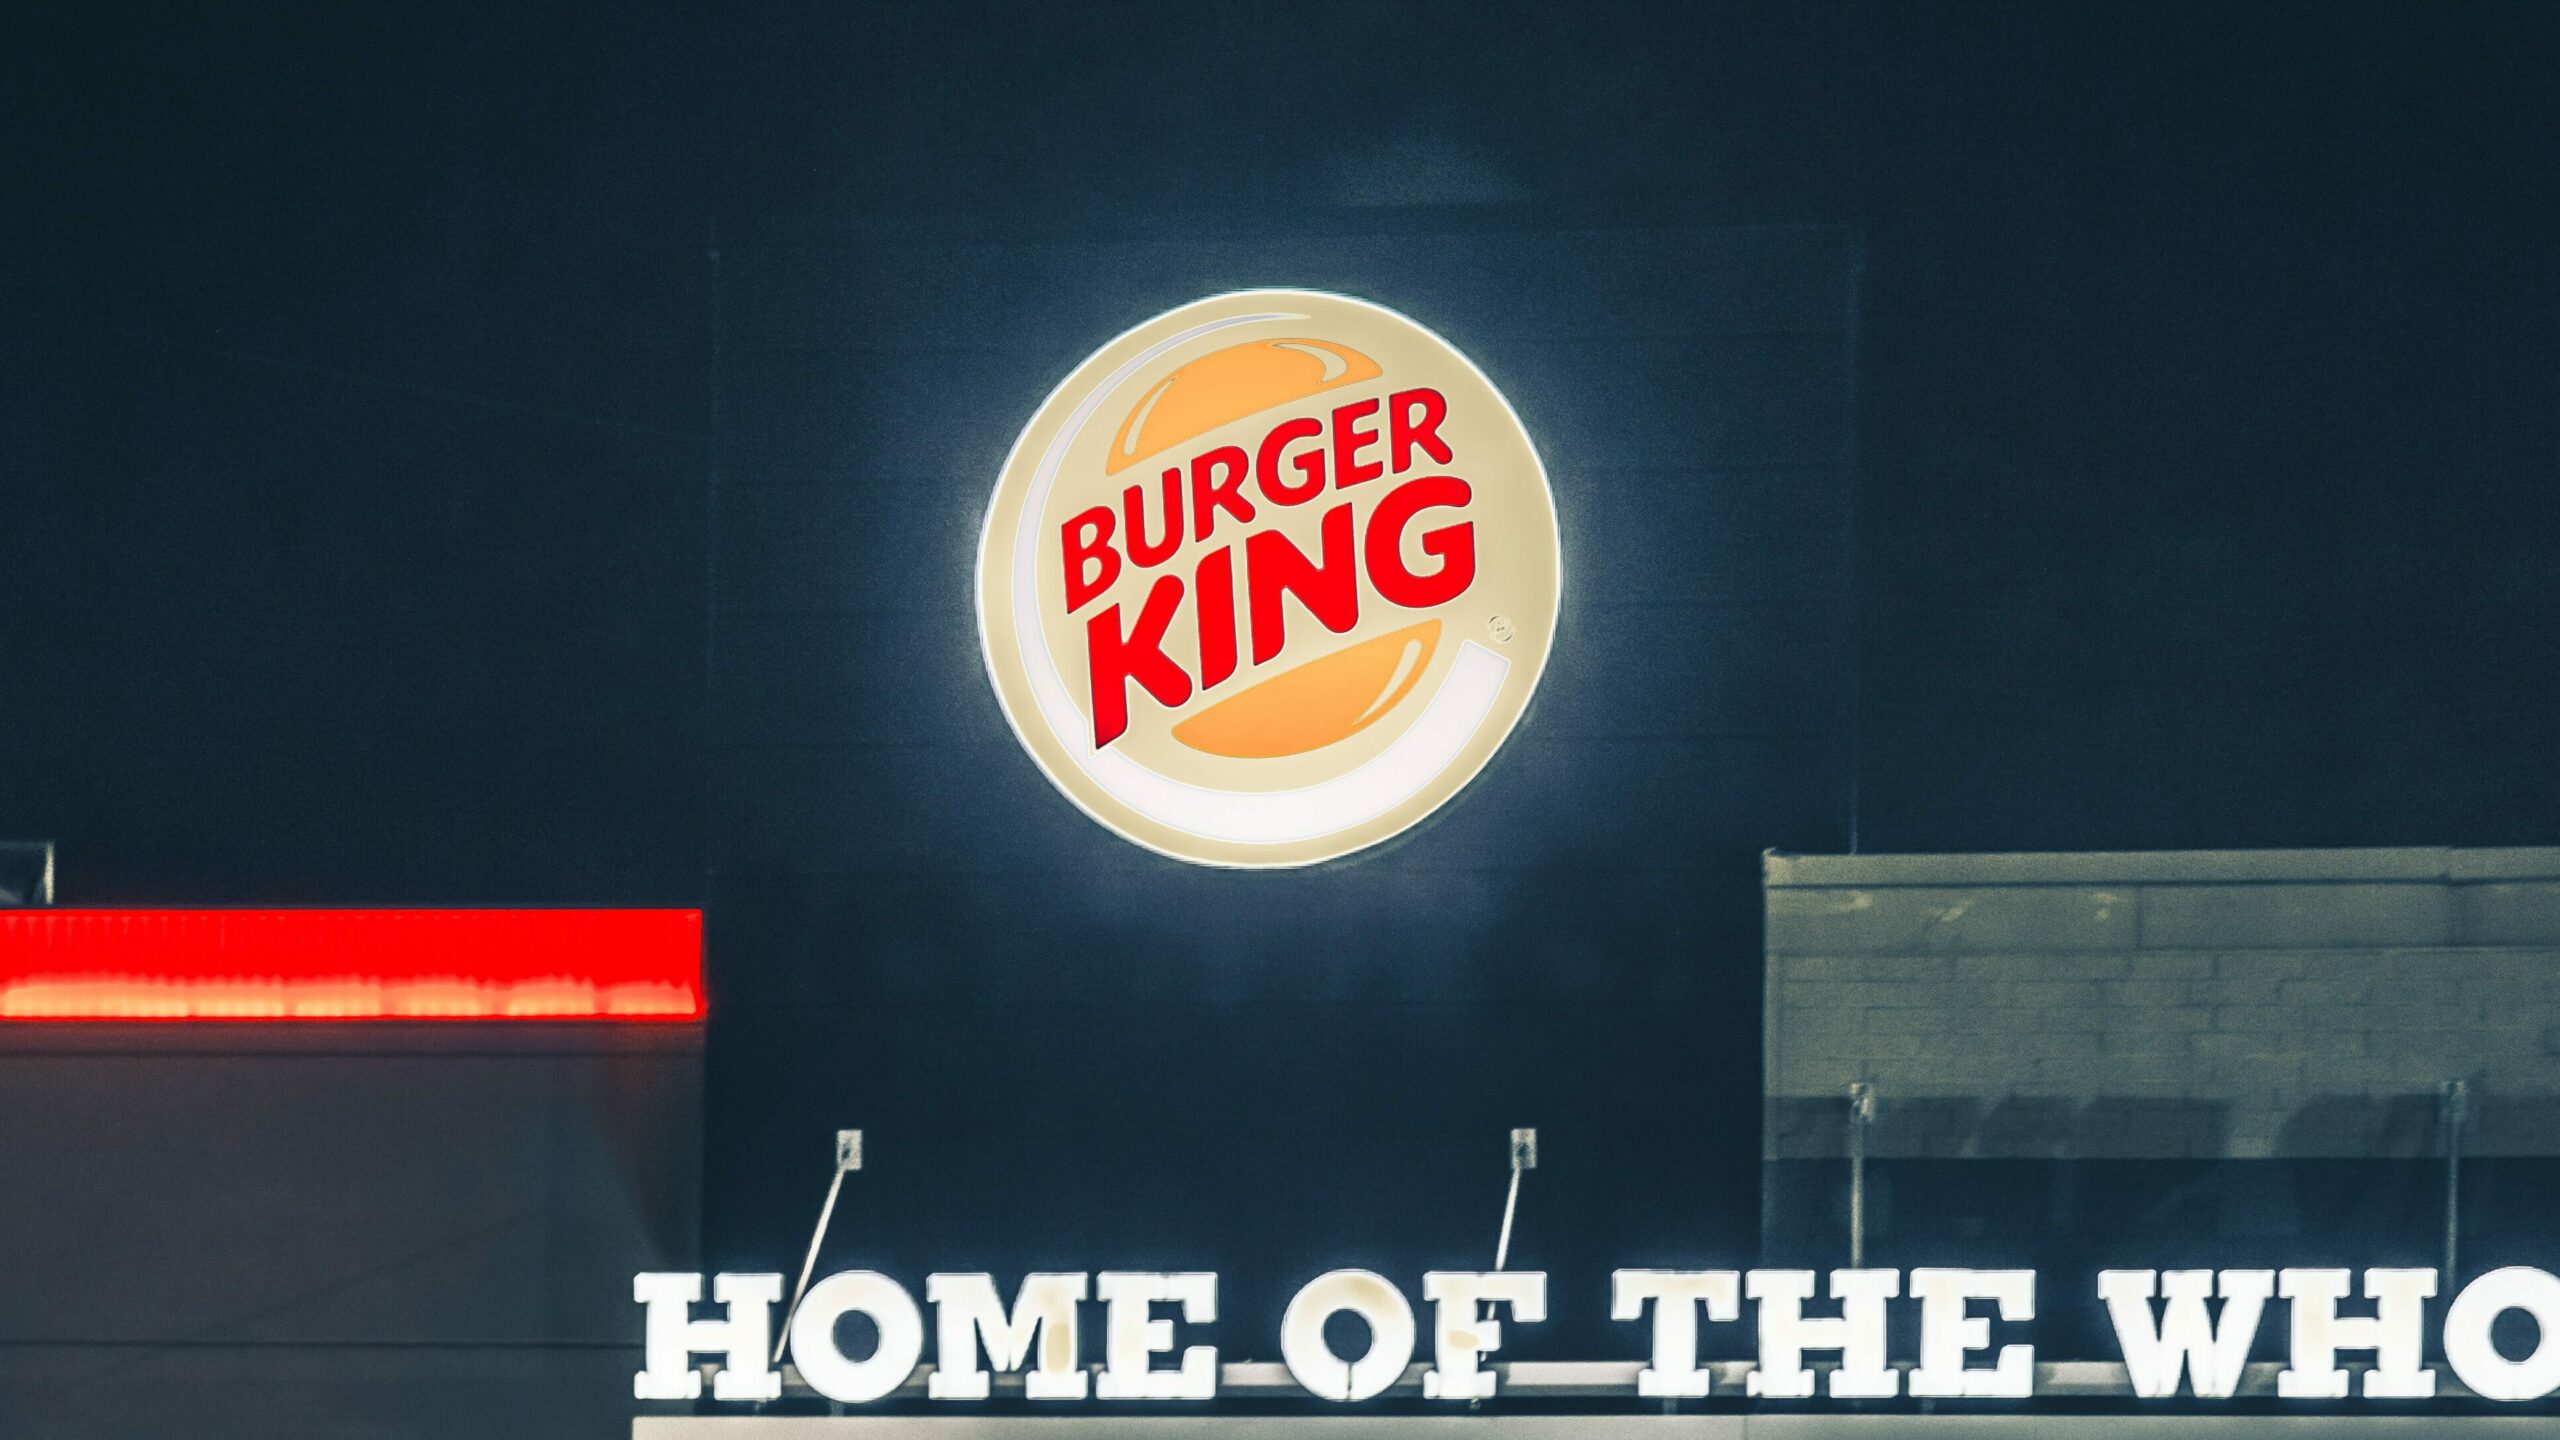 How much does burger king pay?